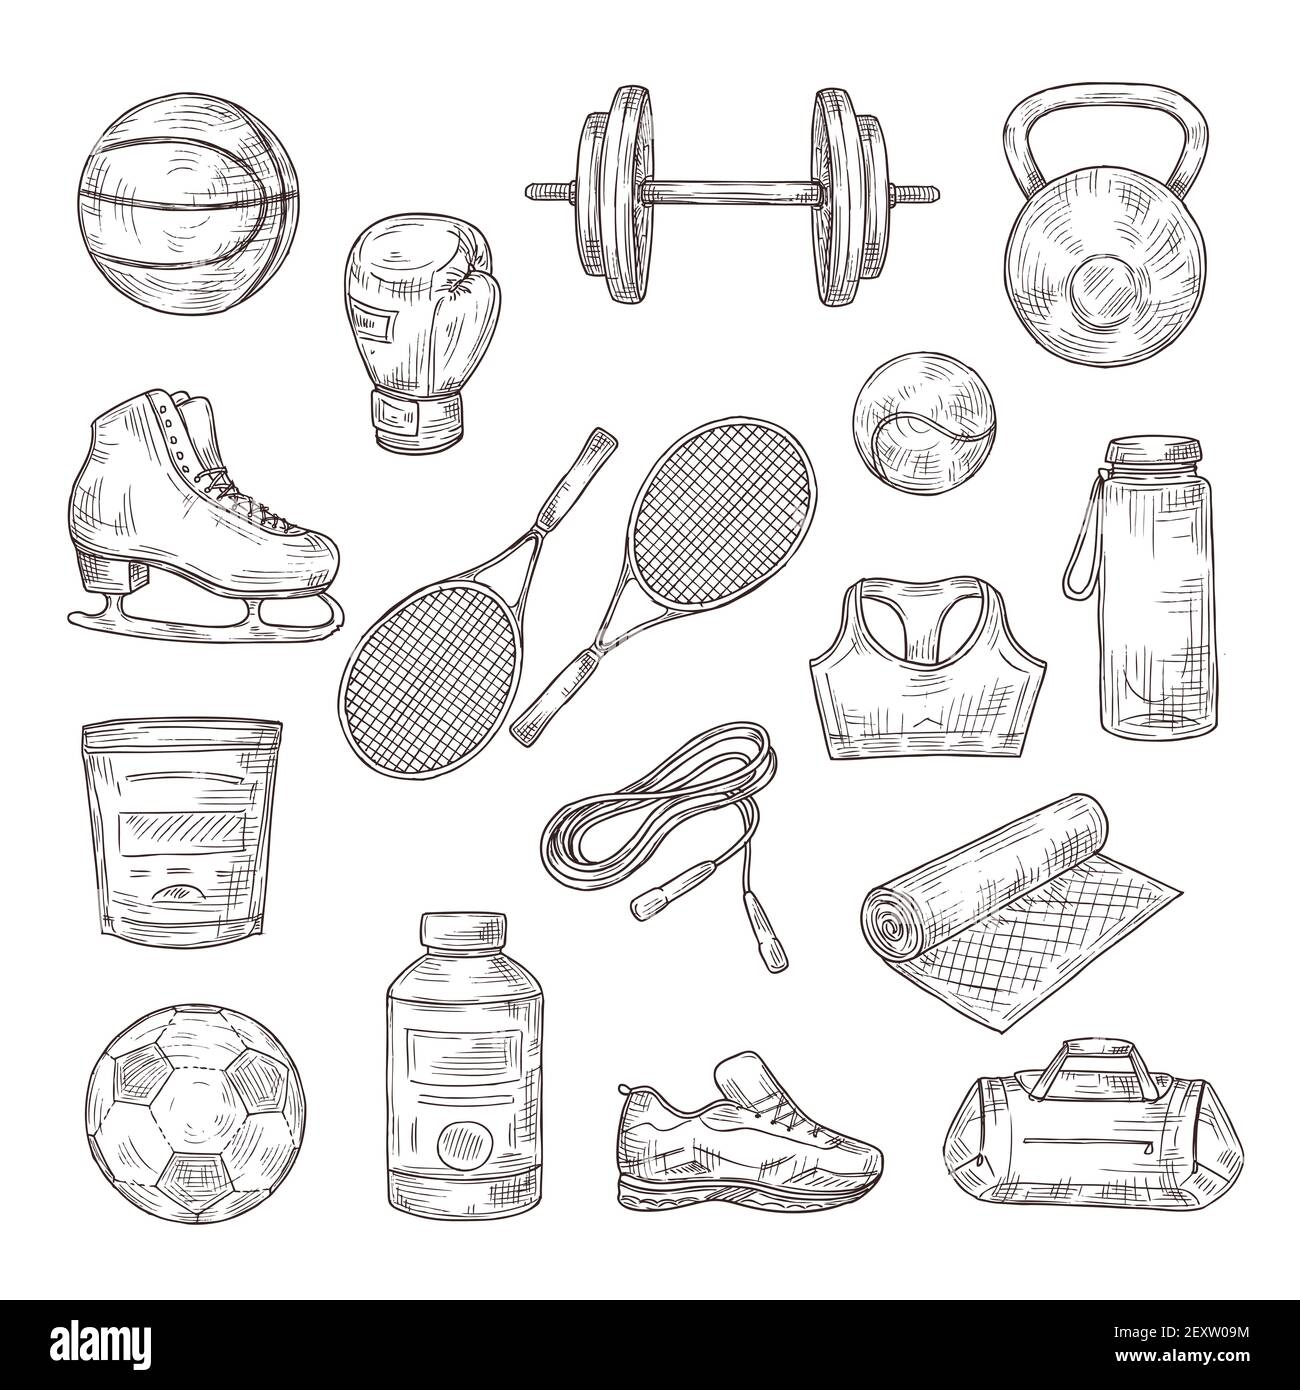 Sketch sports equipment. Ball, dumbbell and tennis rackets, boxing glove and jump rope, sports nutrition. Doodle fitness vector set. Illustration football and tennis, equipment sketch for sport Stock Vector